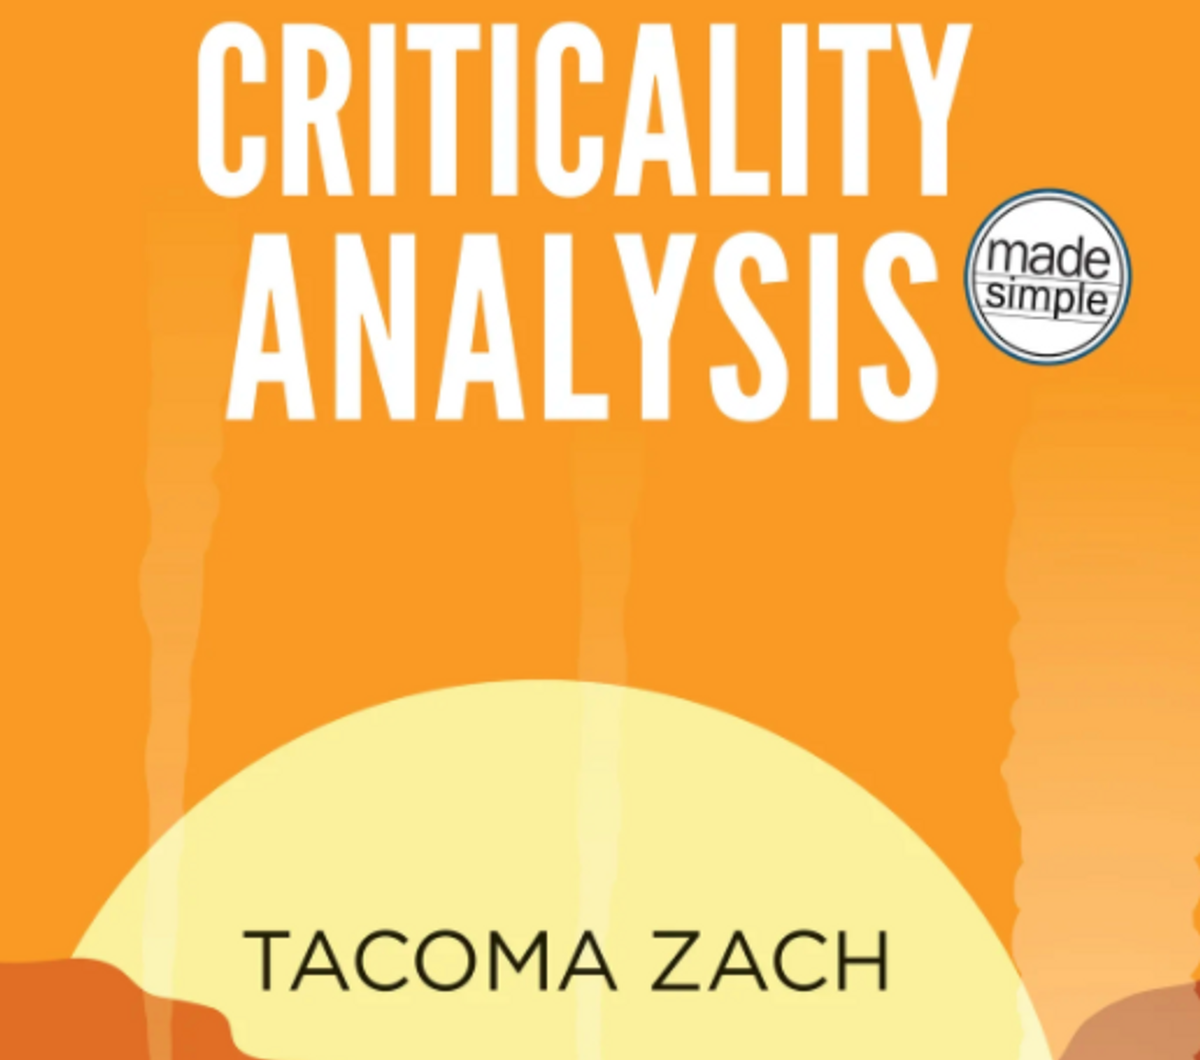 Criticality analysis made simple